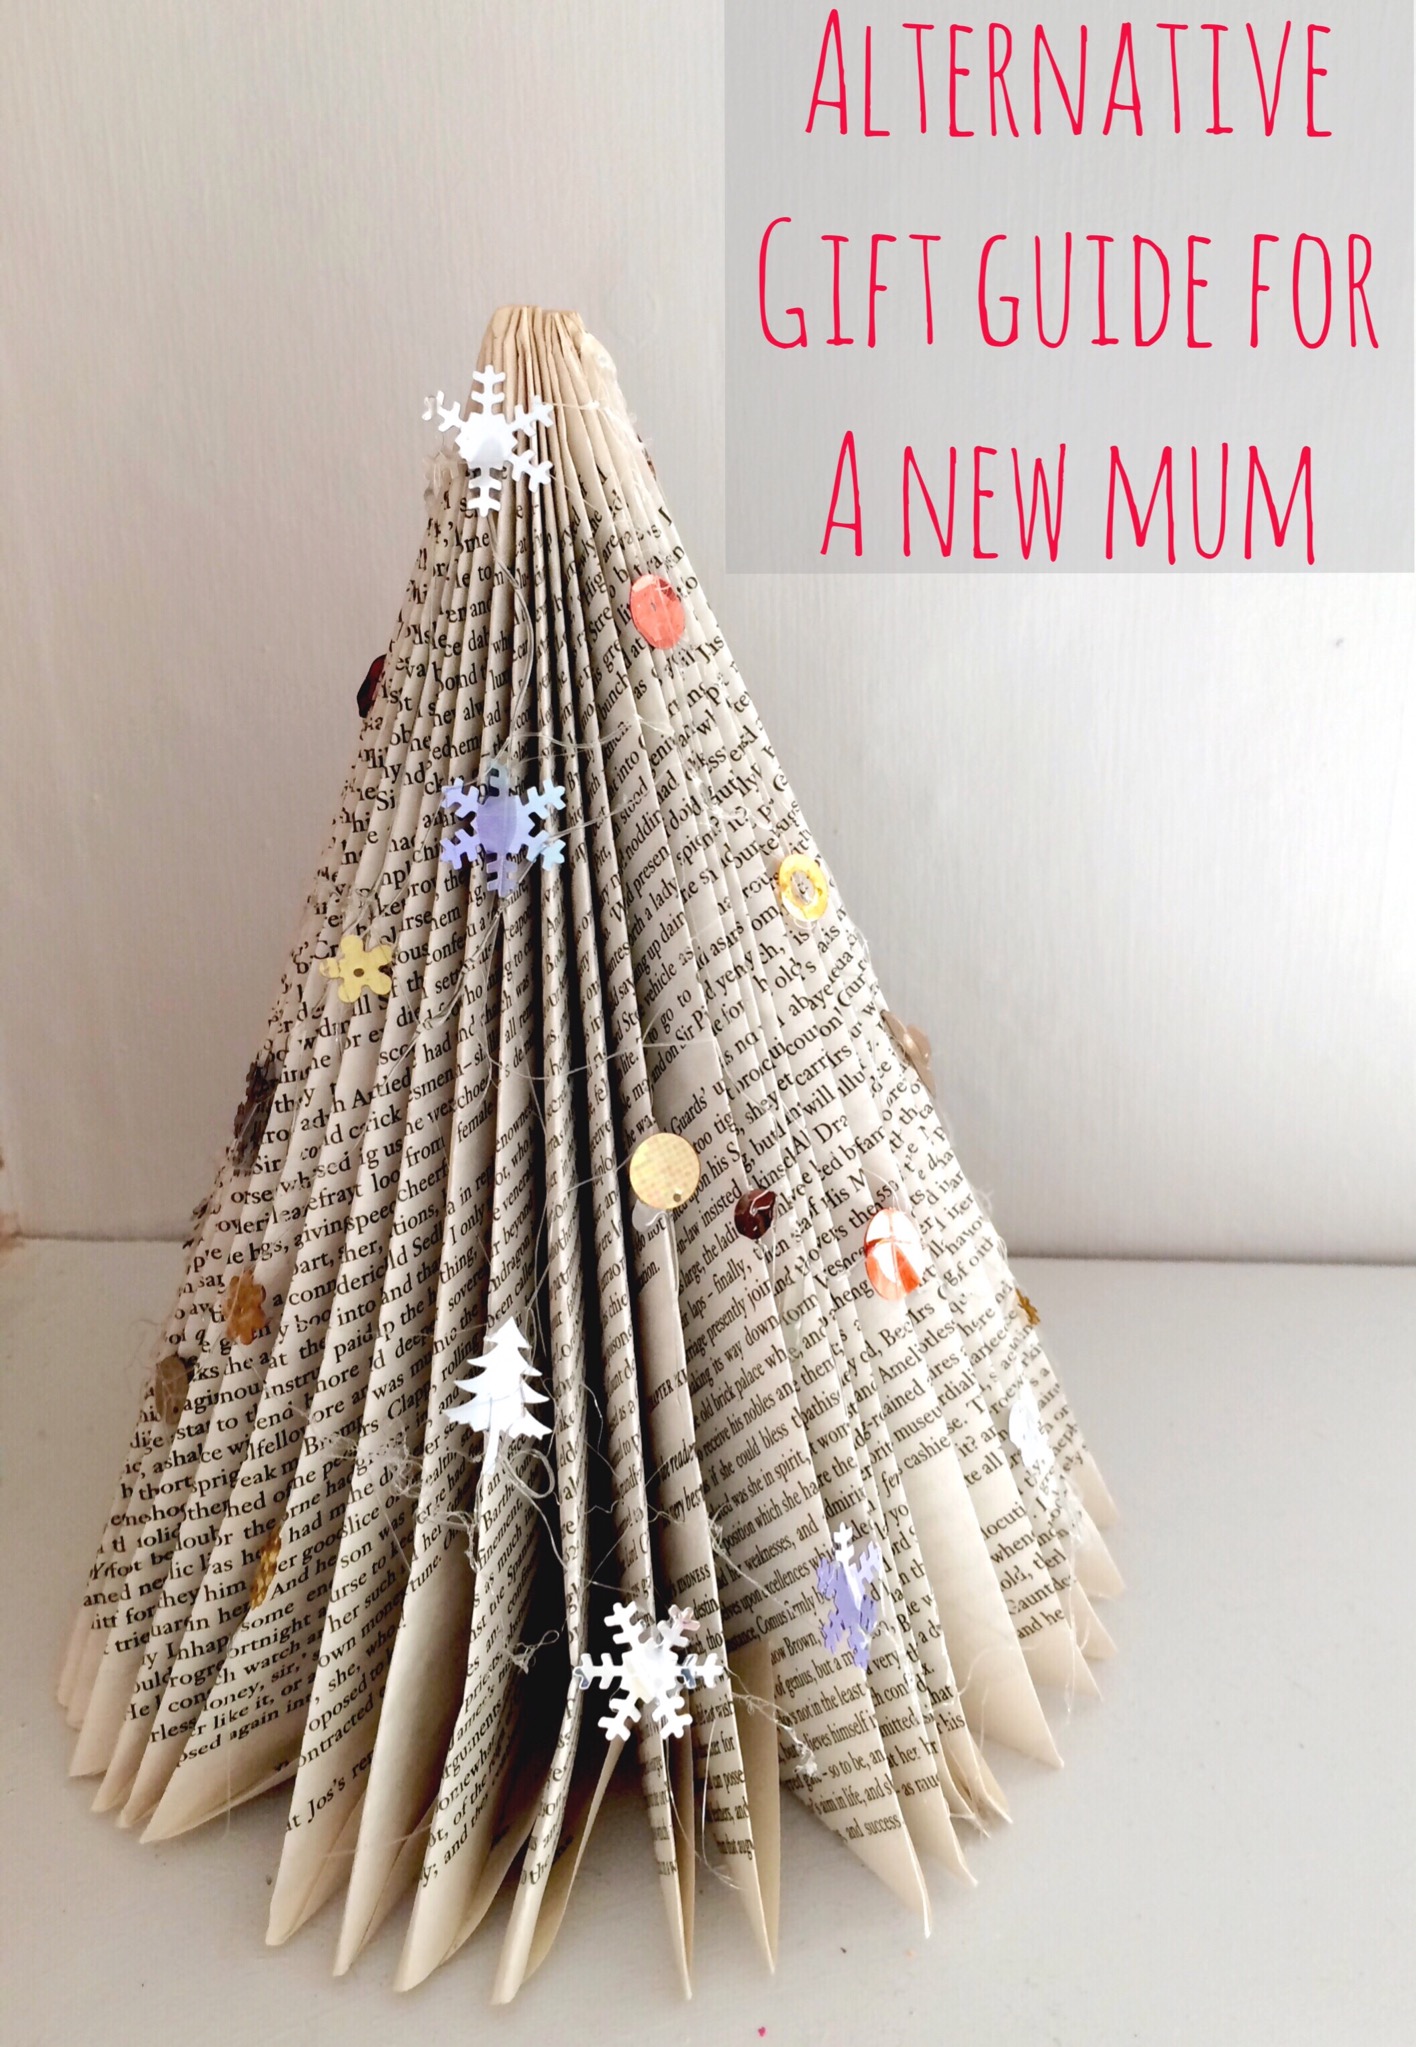 Christmas gift guide for new mums - present ideas mums will REALLY want this year. Make sure you read!